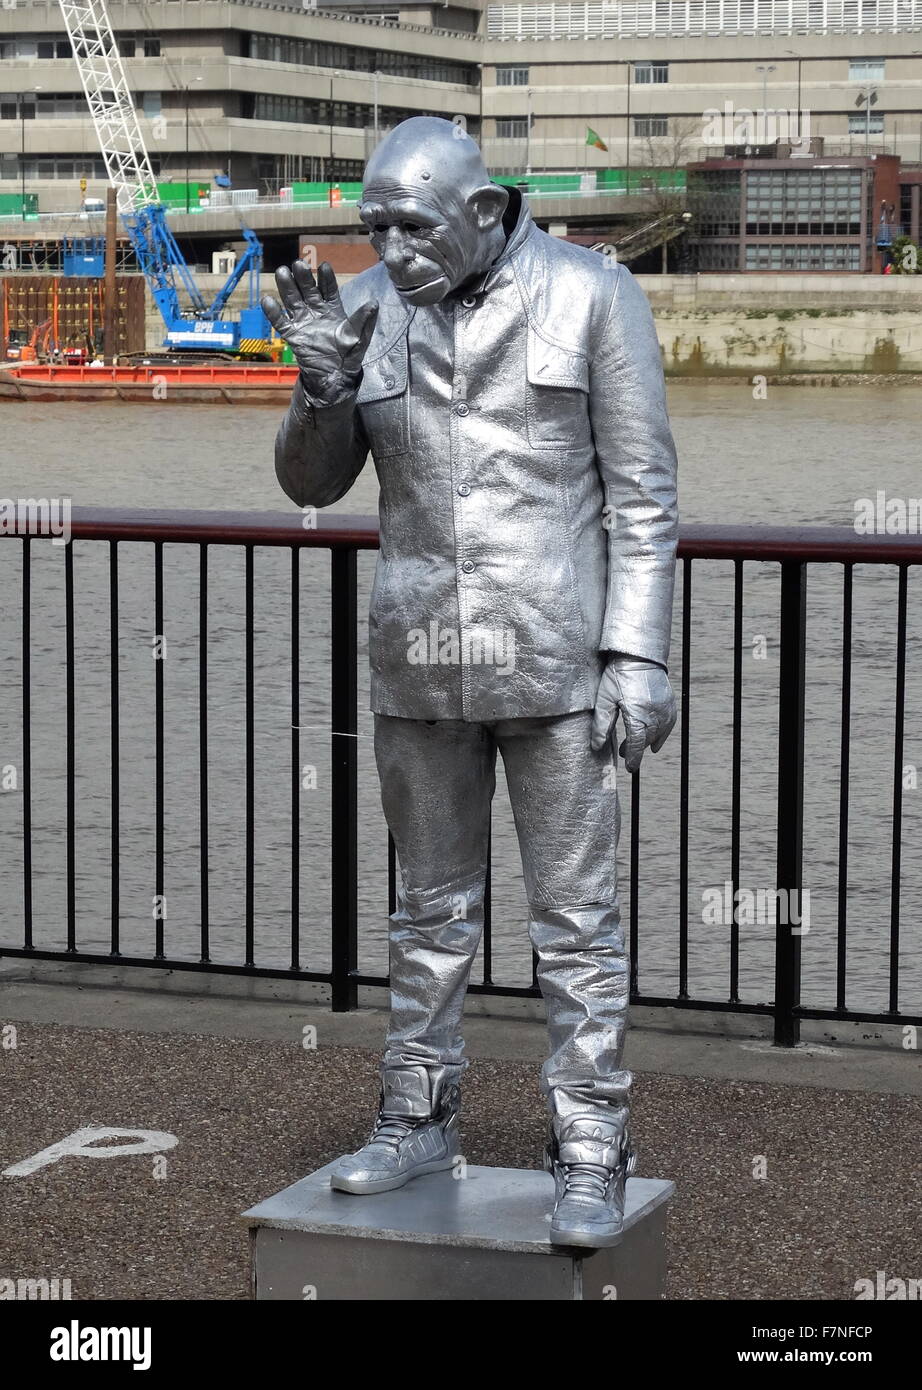 Street performer dressed as robot. The performer is creating the illusion that he is a robot. London, United Kingdom. Dated 1015 Stock Photo